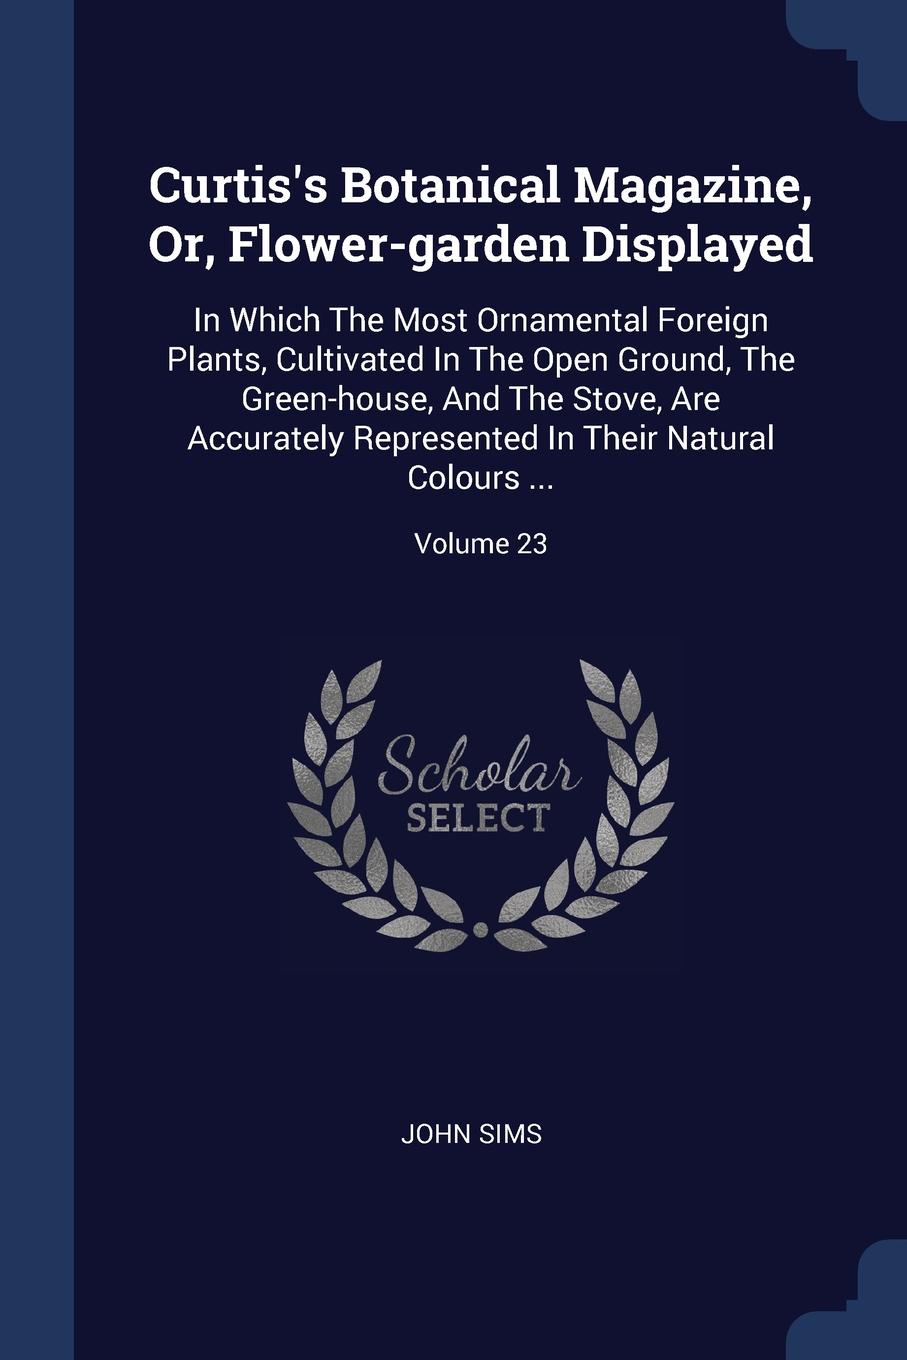 Curtis.s Botanical Magazine, Or, Flower-garden Displayed. In Which The Most Ornamental Foreign Plants, Cultivated In The Open Ground, The Green-house, And The Stove, Are Accurately Represented In Their Natural Colours ...; Volume 23